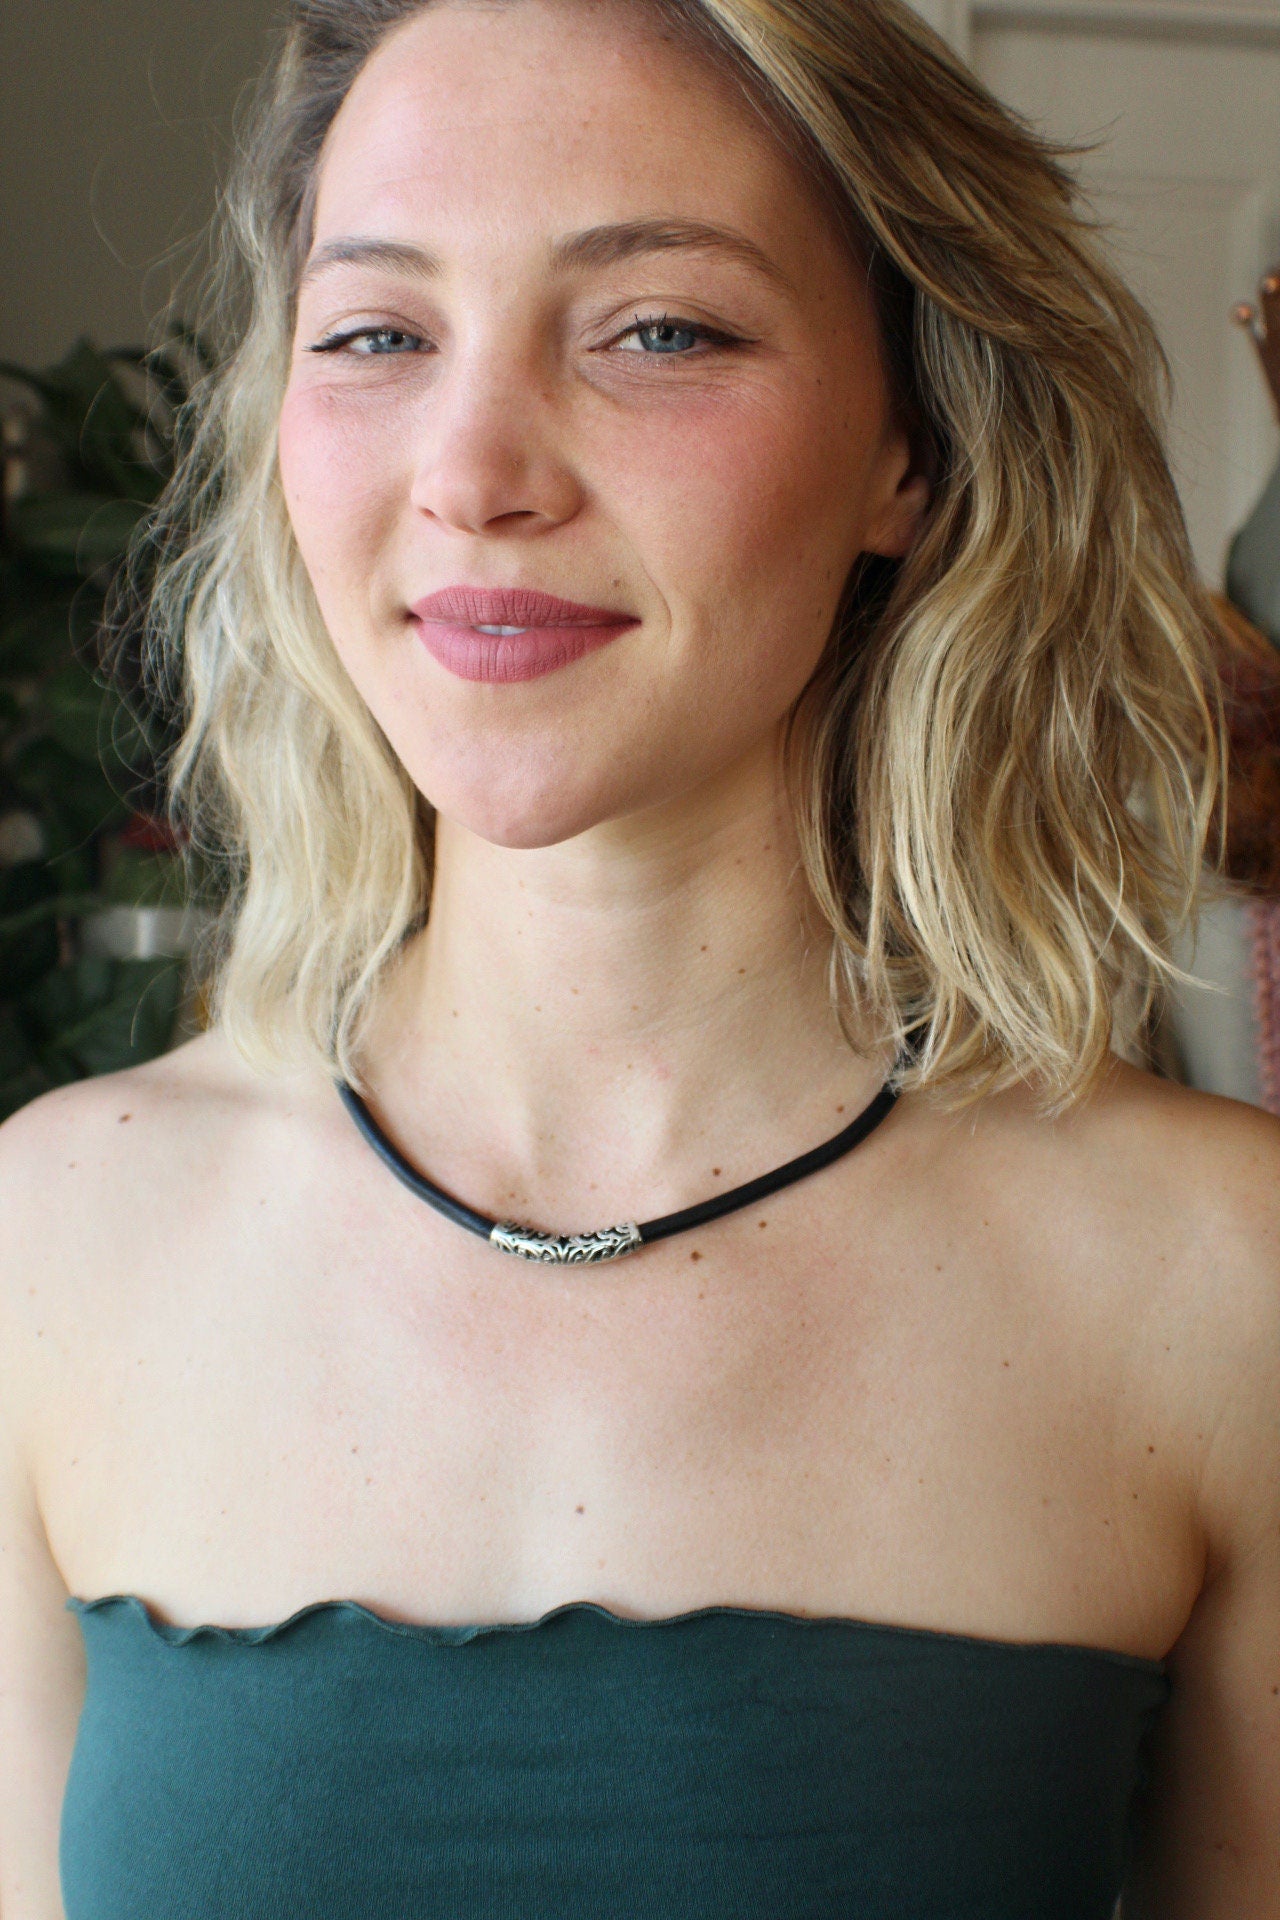 Leather Necklace. Natural black Italian leather choker necklace with ornate star and curved sterling silver tube, finished with accent magnetic clasp.